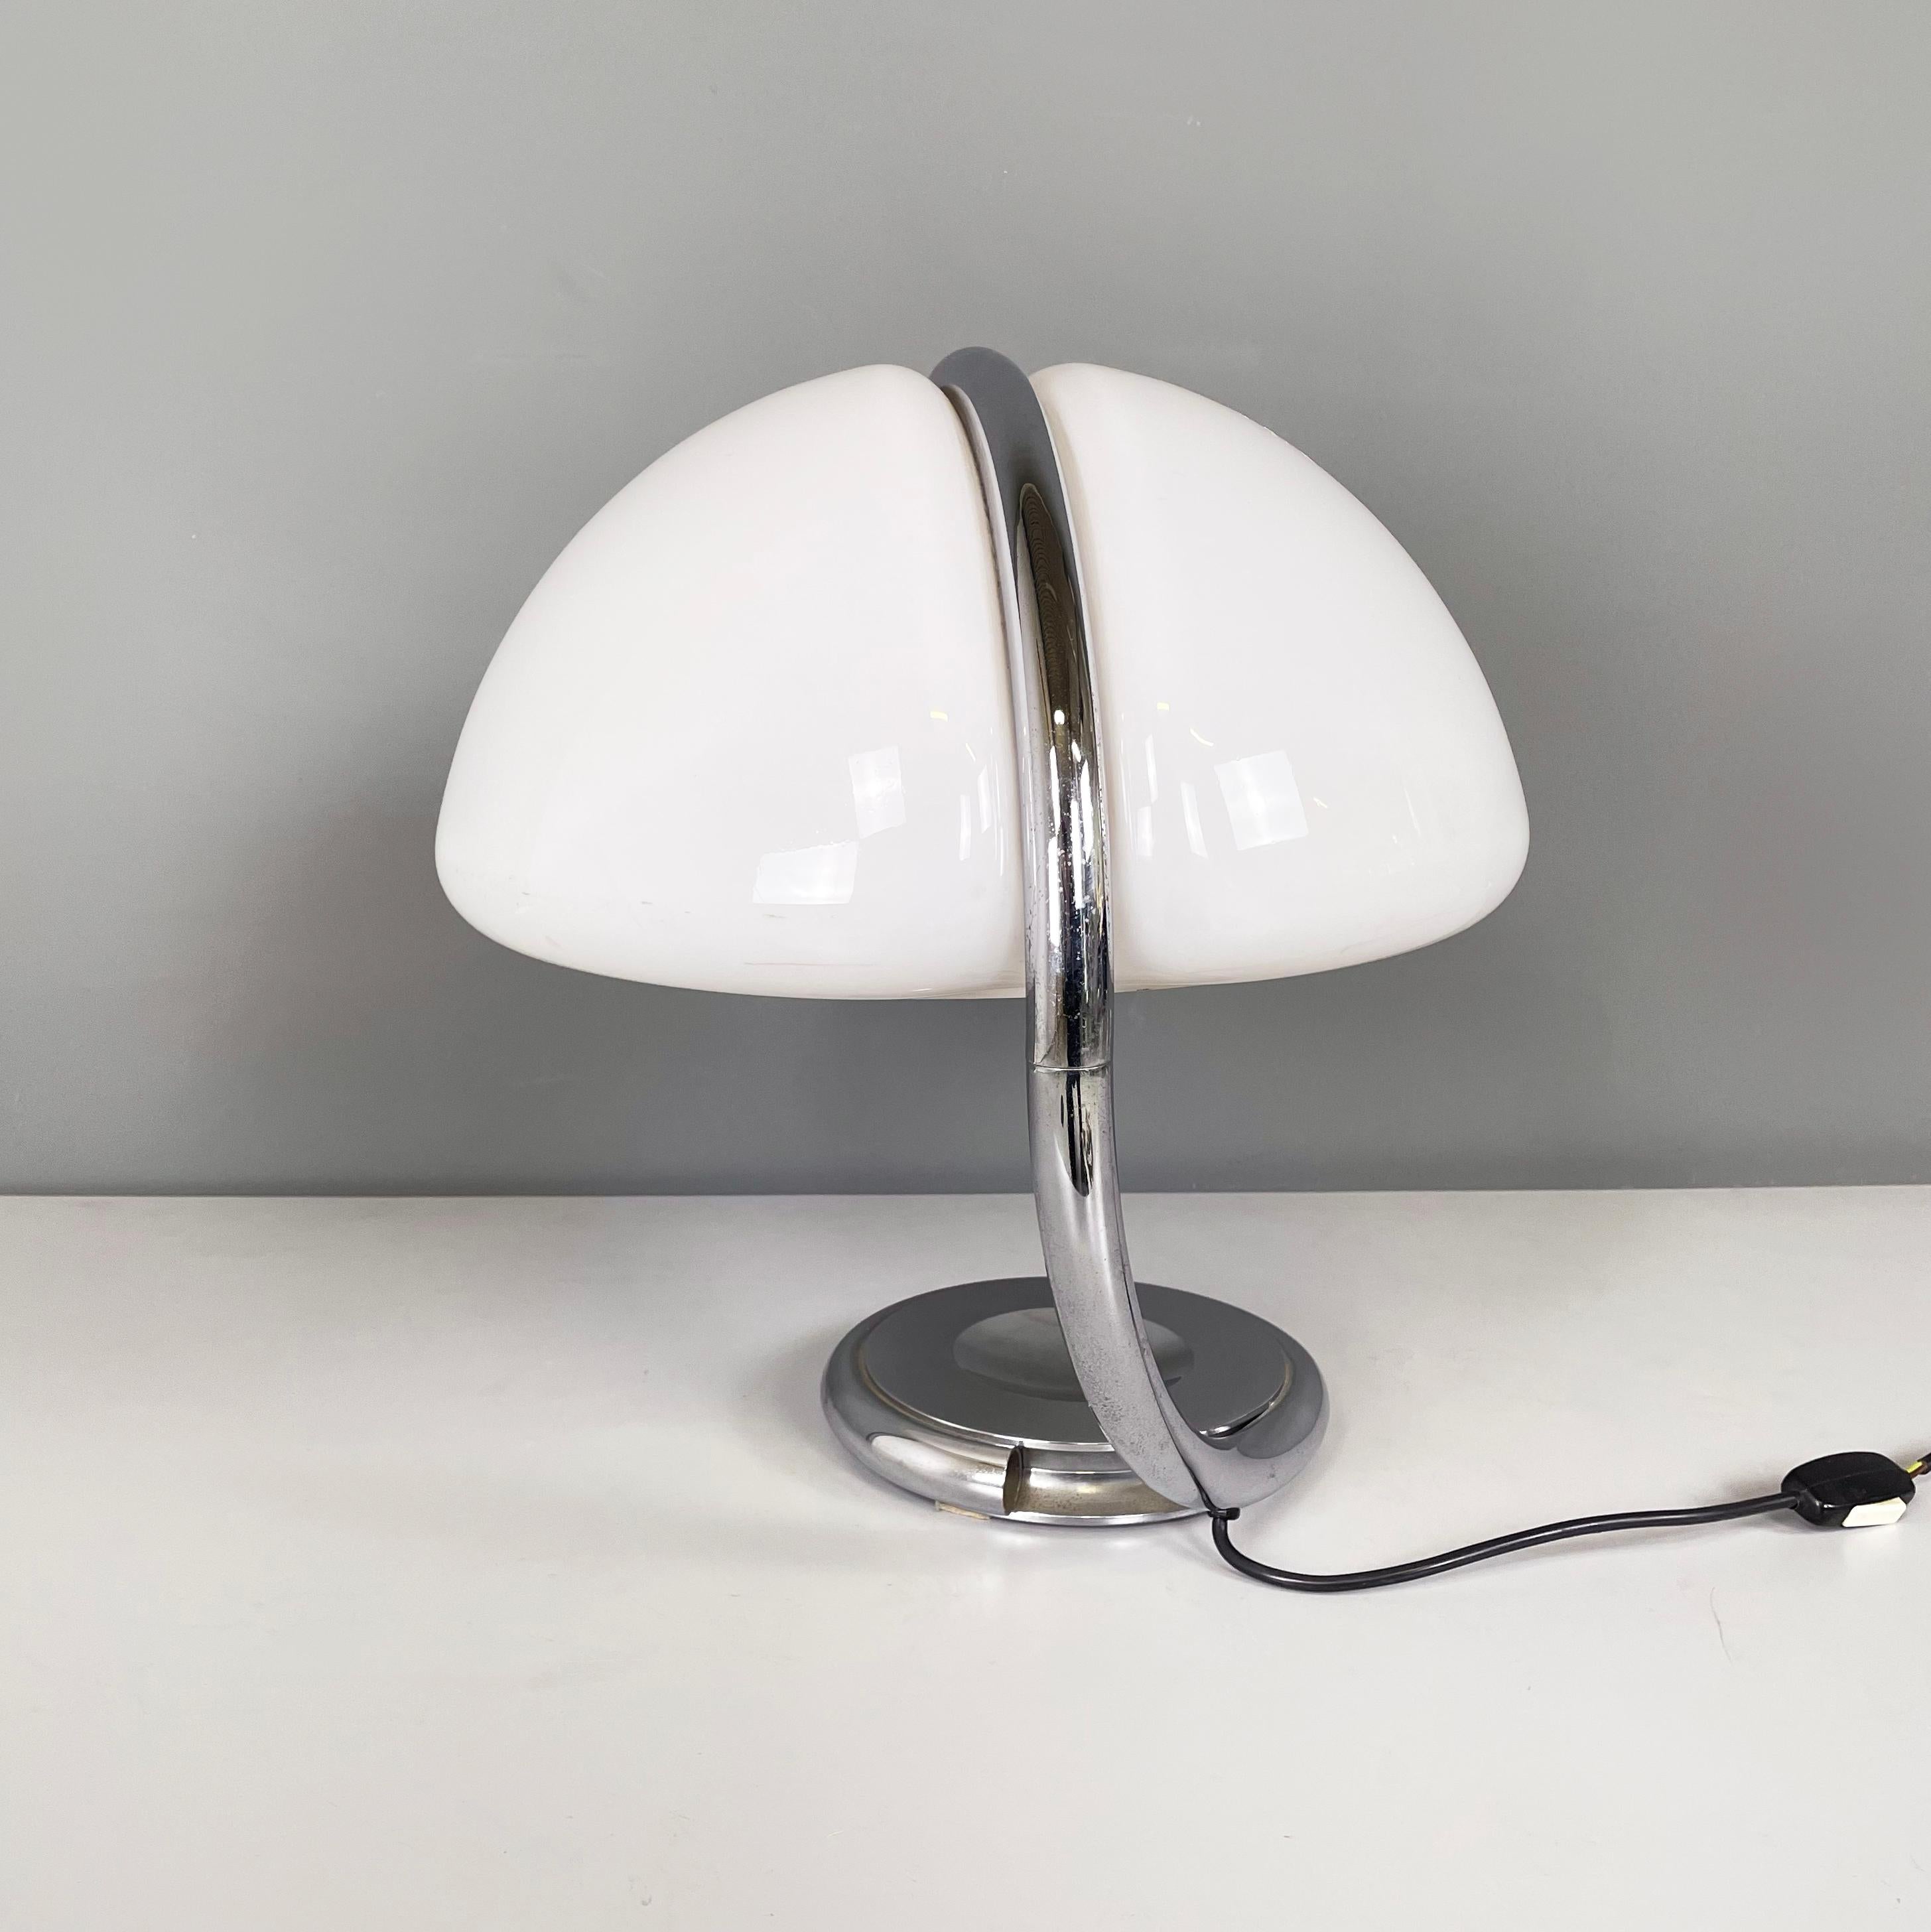 Italian space age Table lamp Serpente by Elio Martinelli Martinelli Luce, 1970s For Sale 1